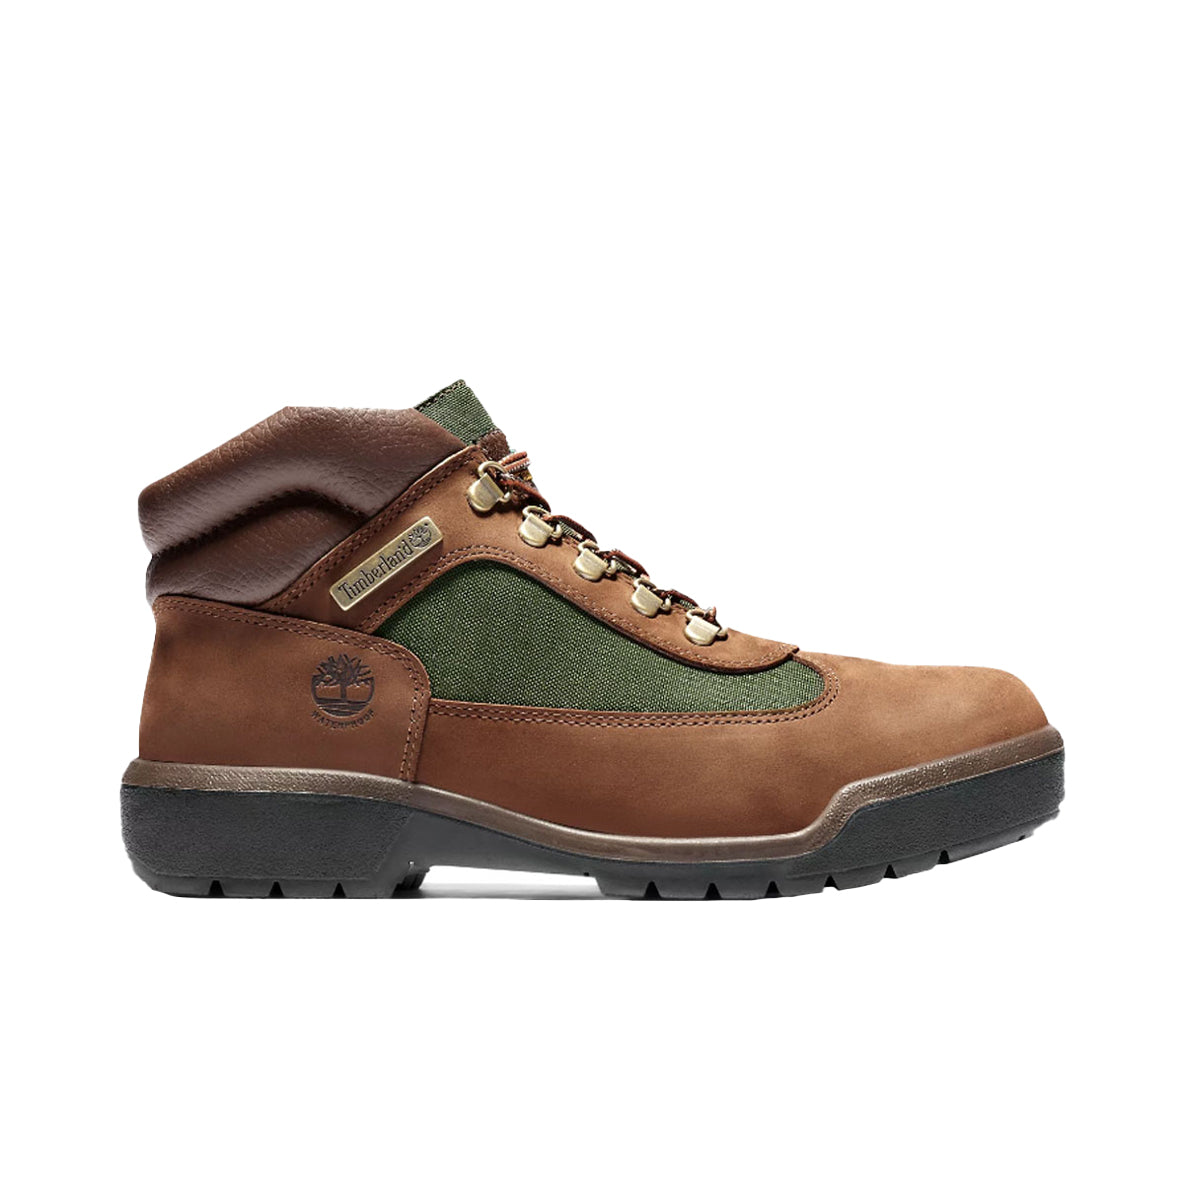 Timberland Mens Beef & Broccoli Field Boots TB0A18A6D47 Chocolate